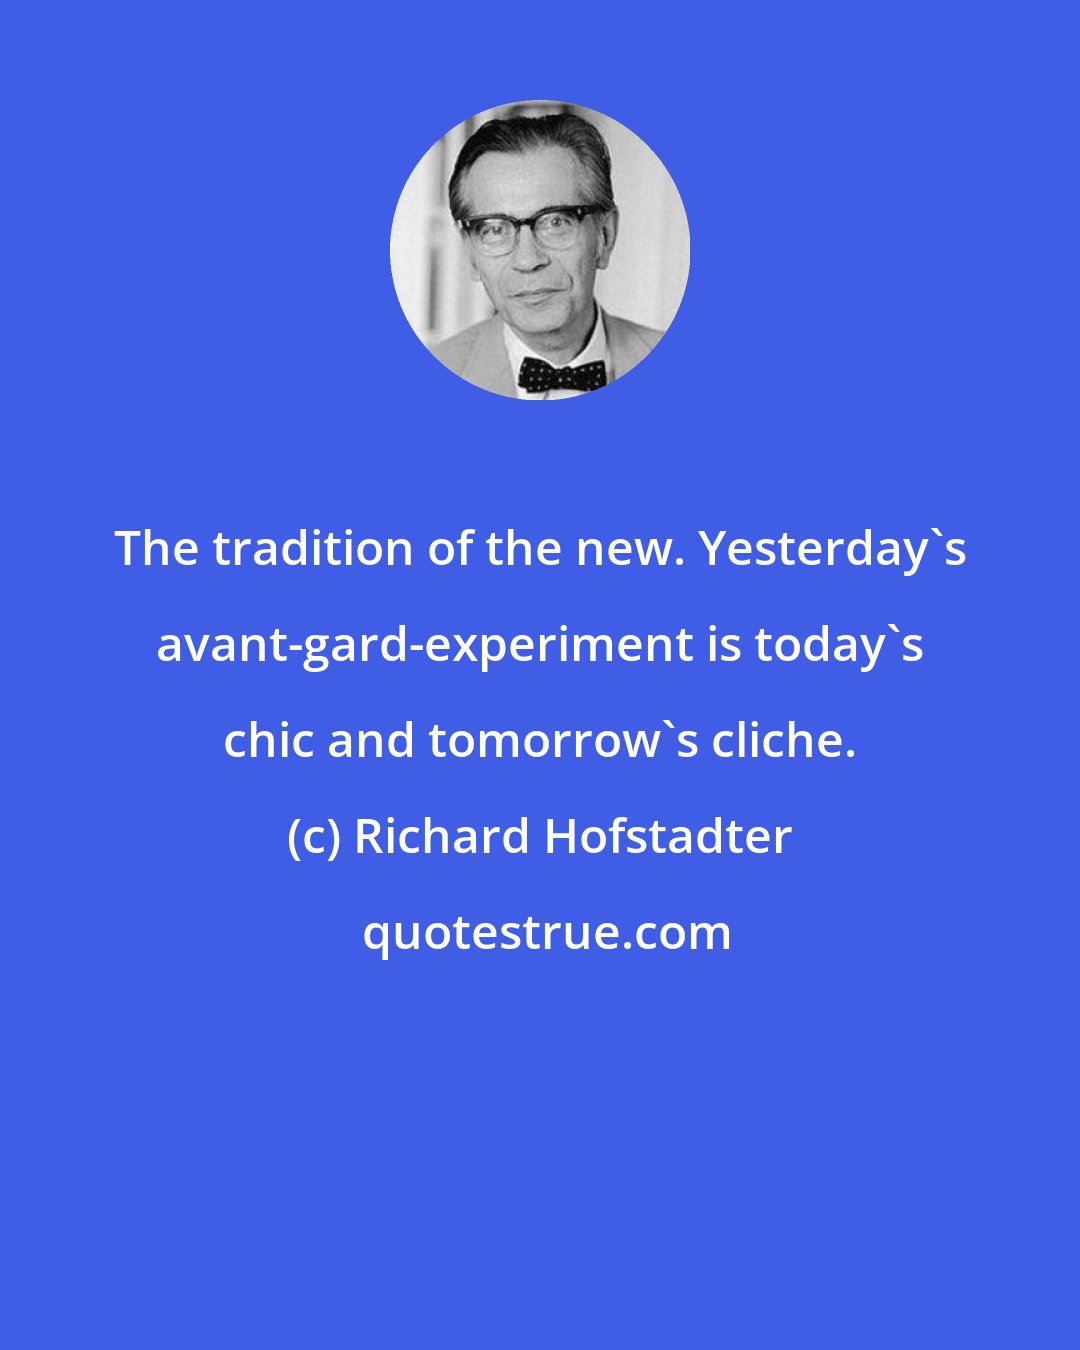 Richard Hofstadter: The tradition of the new. Yesterday's avant-gard-experiment is today's chic and tomorrow's cliche.